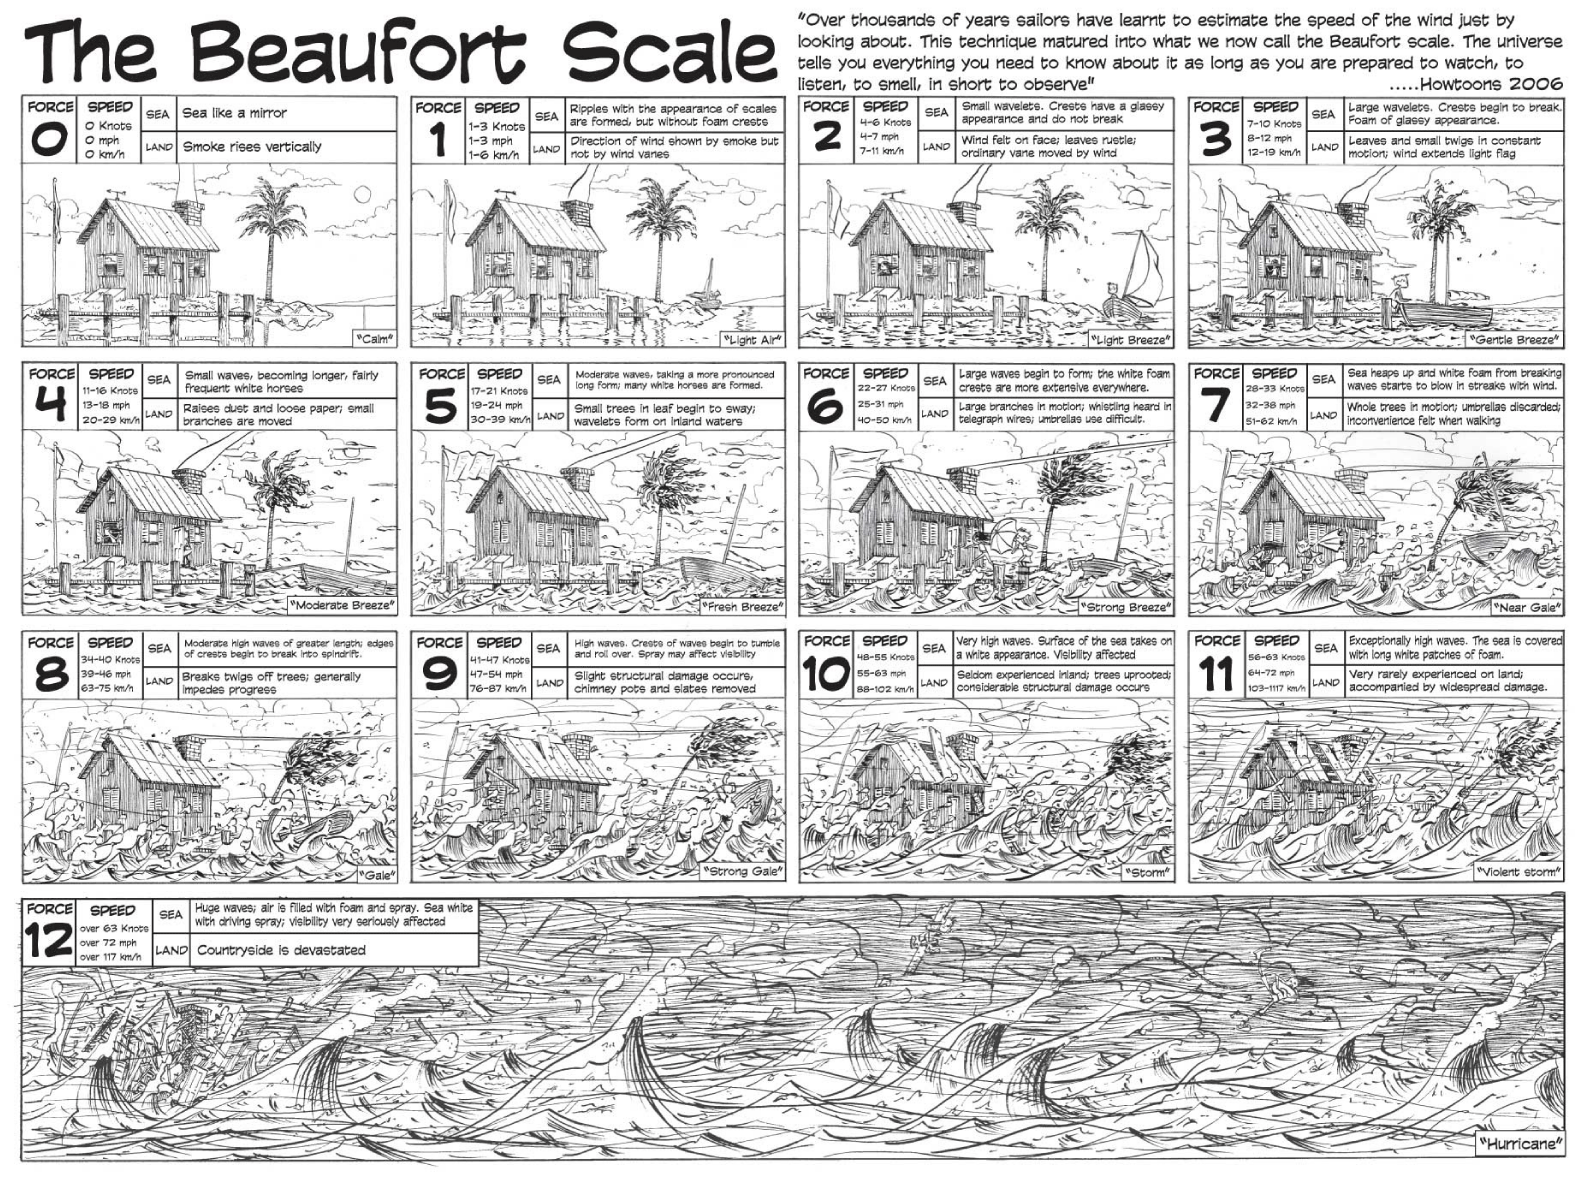 Humorous
	version of Beaufort Scale